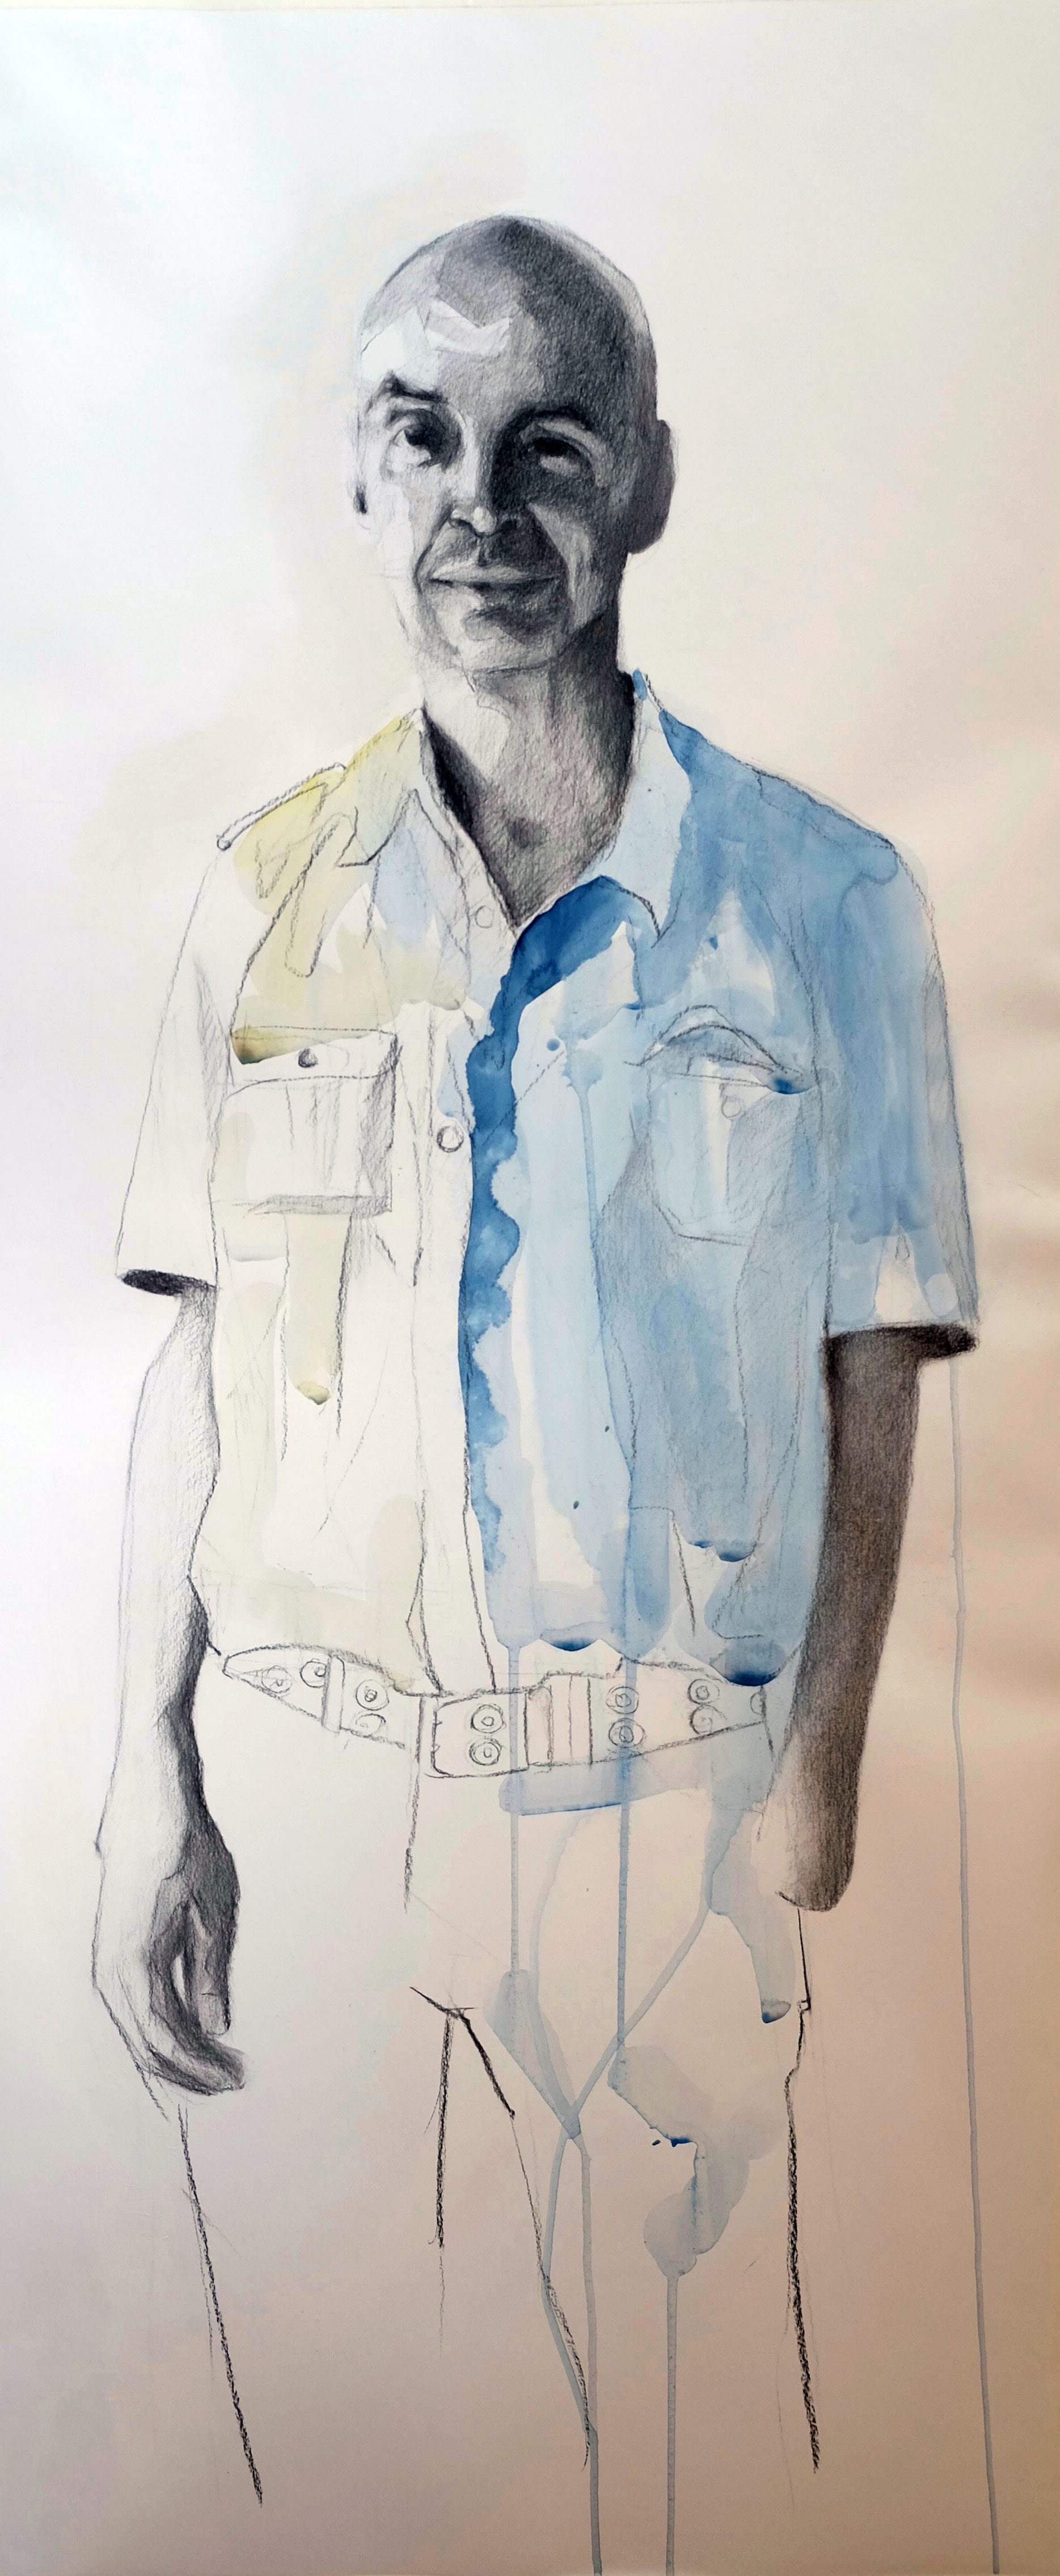 Charcoal and watercolour on paper, 120 x 60 cm